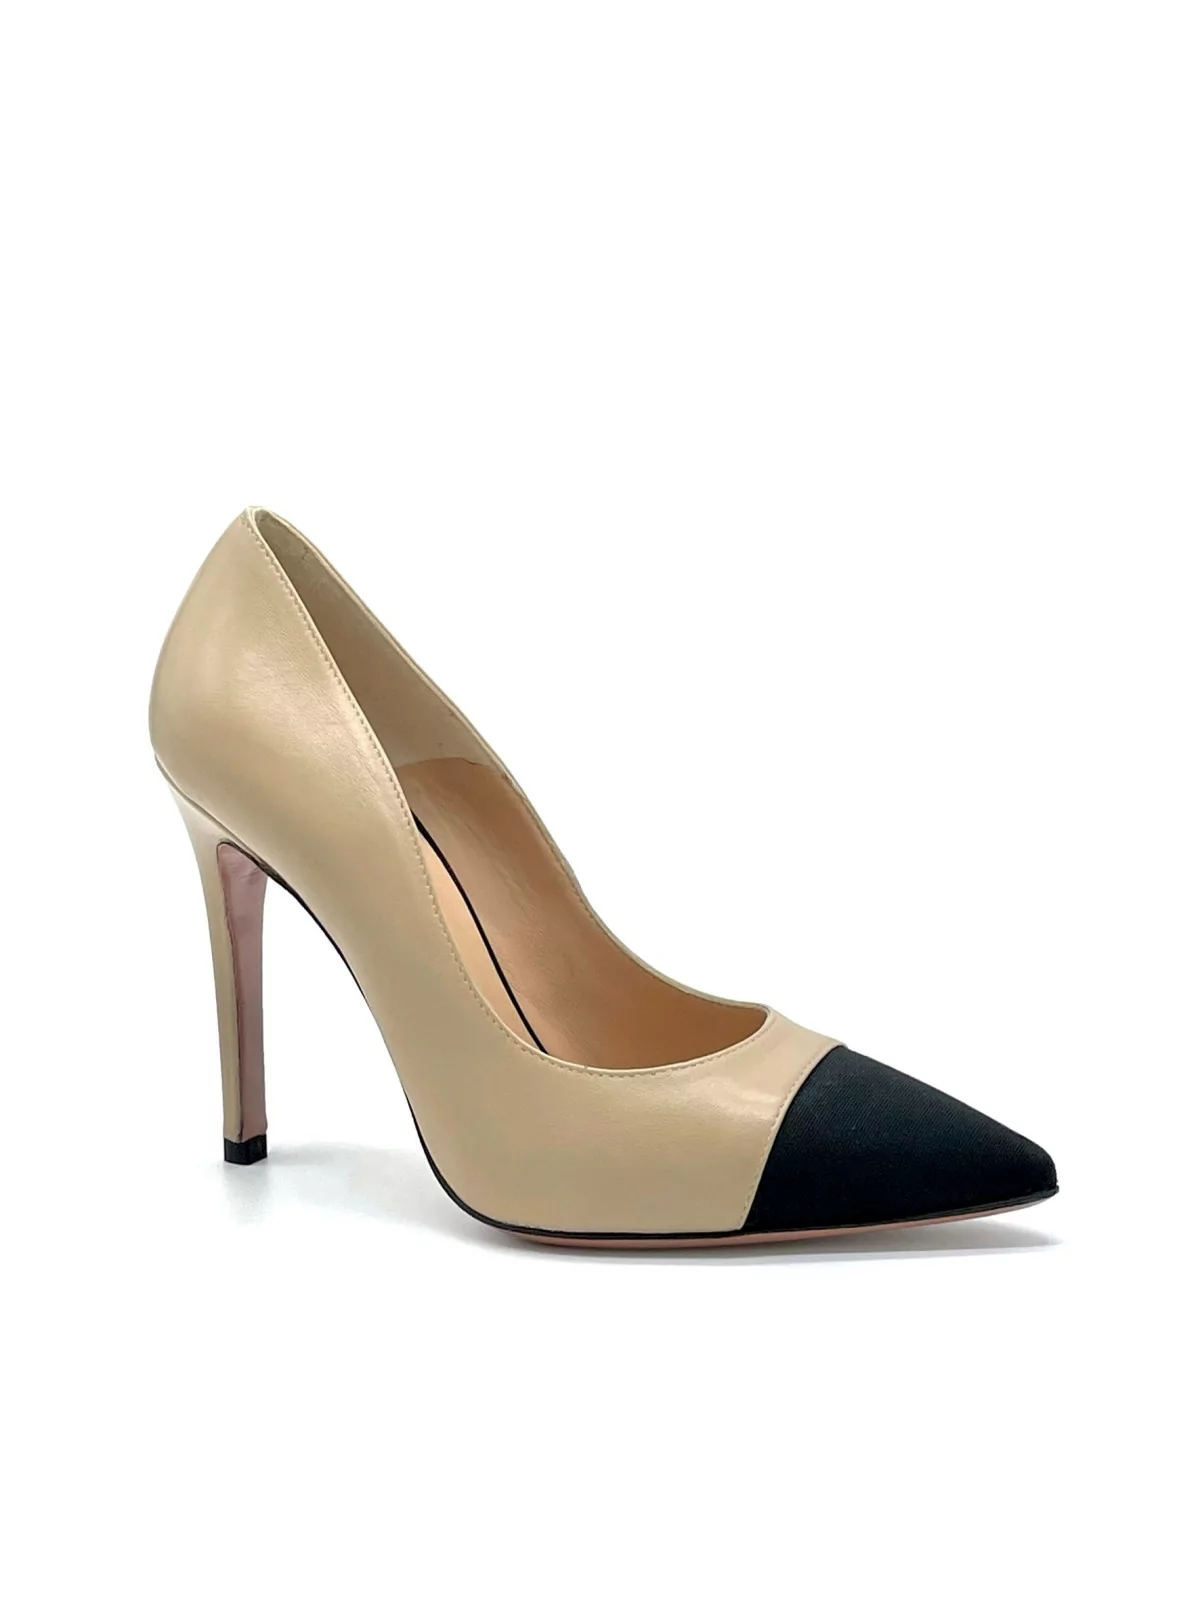 Beige leather and black fabric pump. Leather lining, leather sole. 10,5 cm heel.